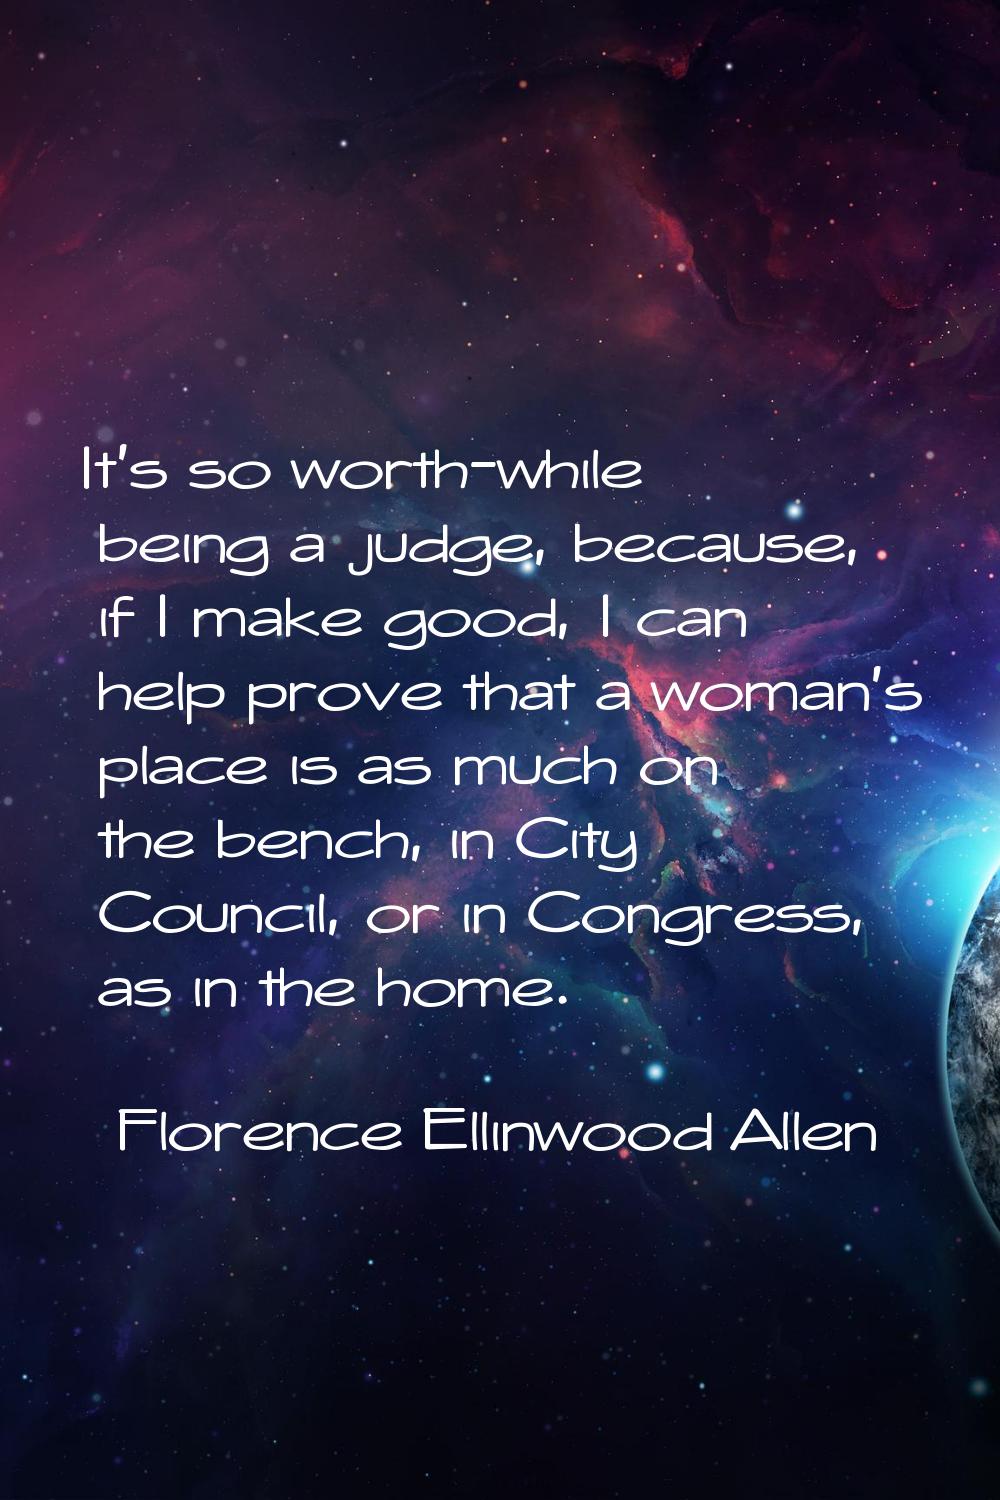 It's so worth-while being a judge, because, if I make good, I can help prove that a woman's place i